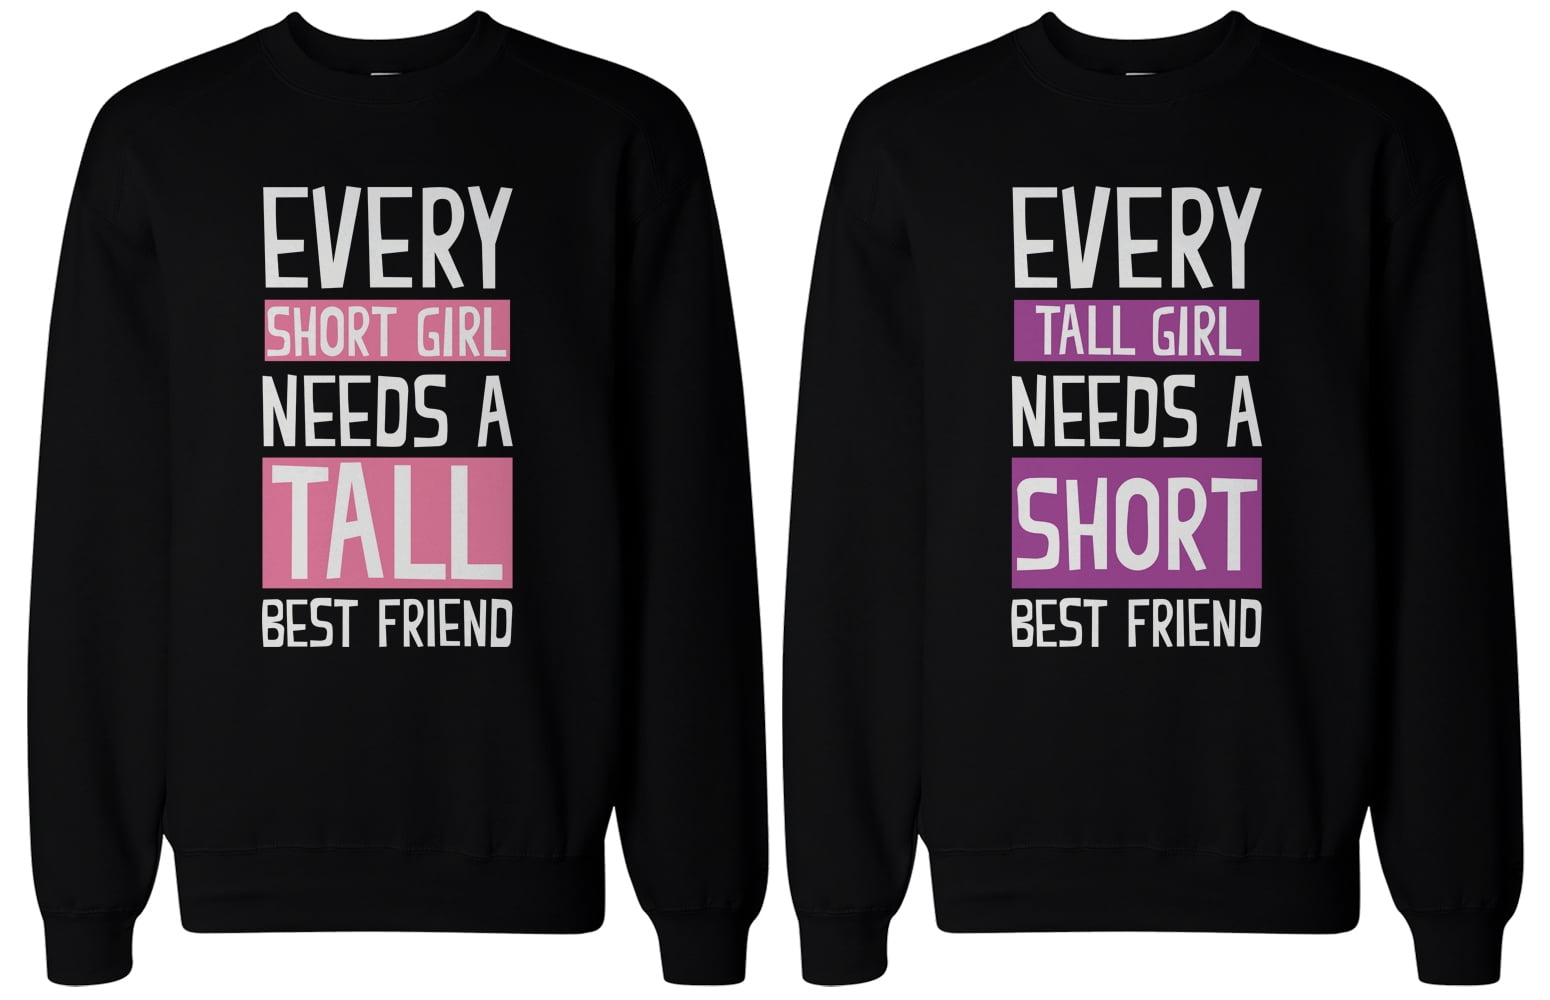 365 Printing - Tall and Short Best Friend Matching Sweatshirts for Best Friends BFF Gift